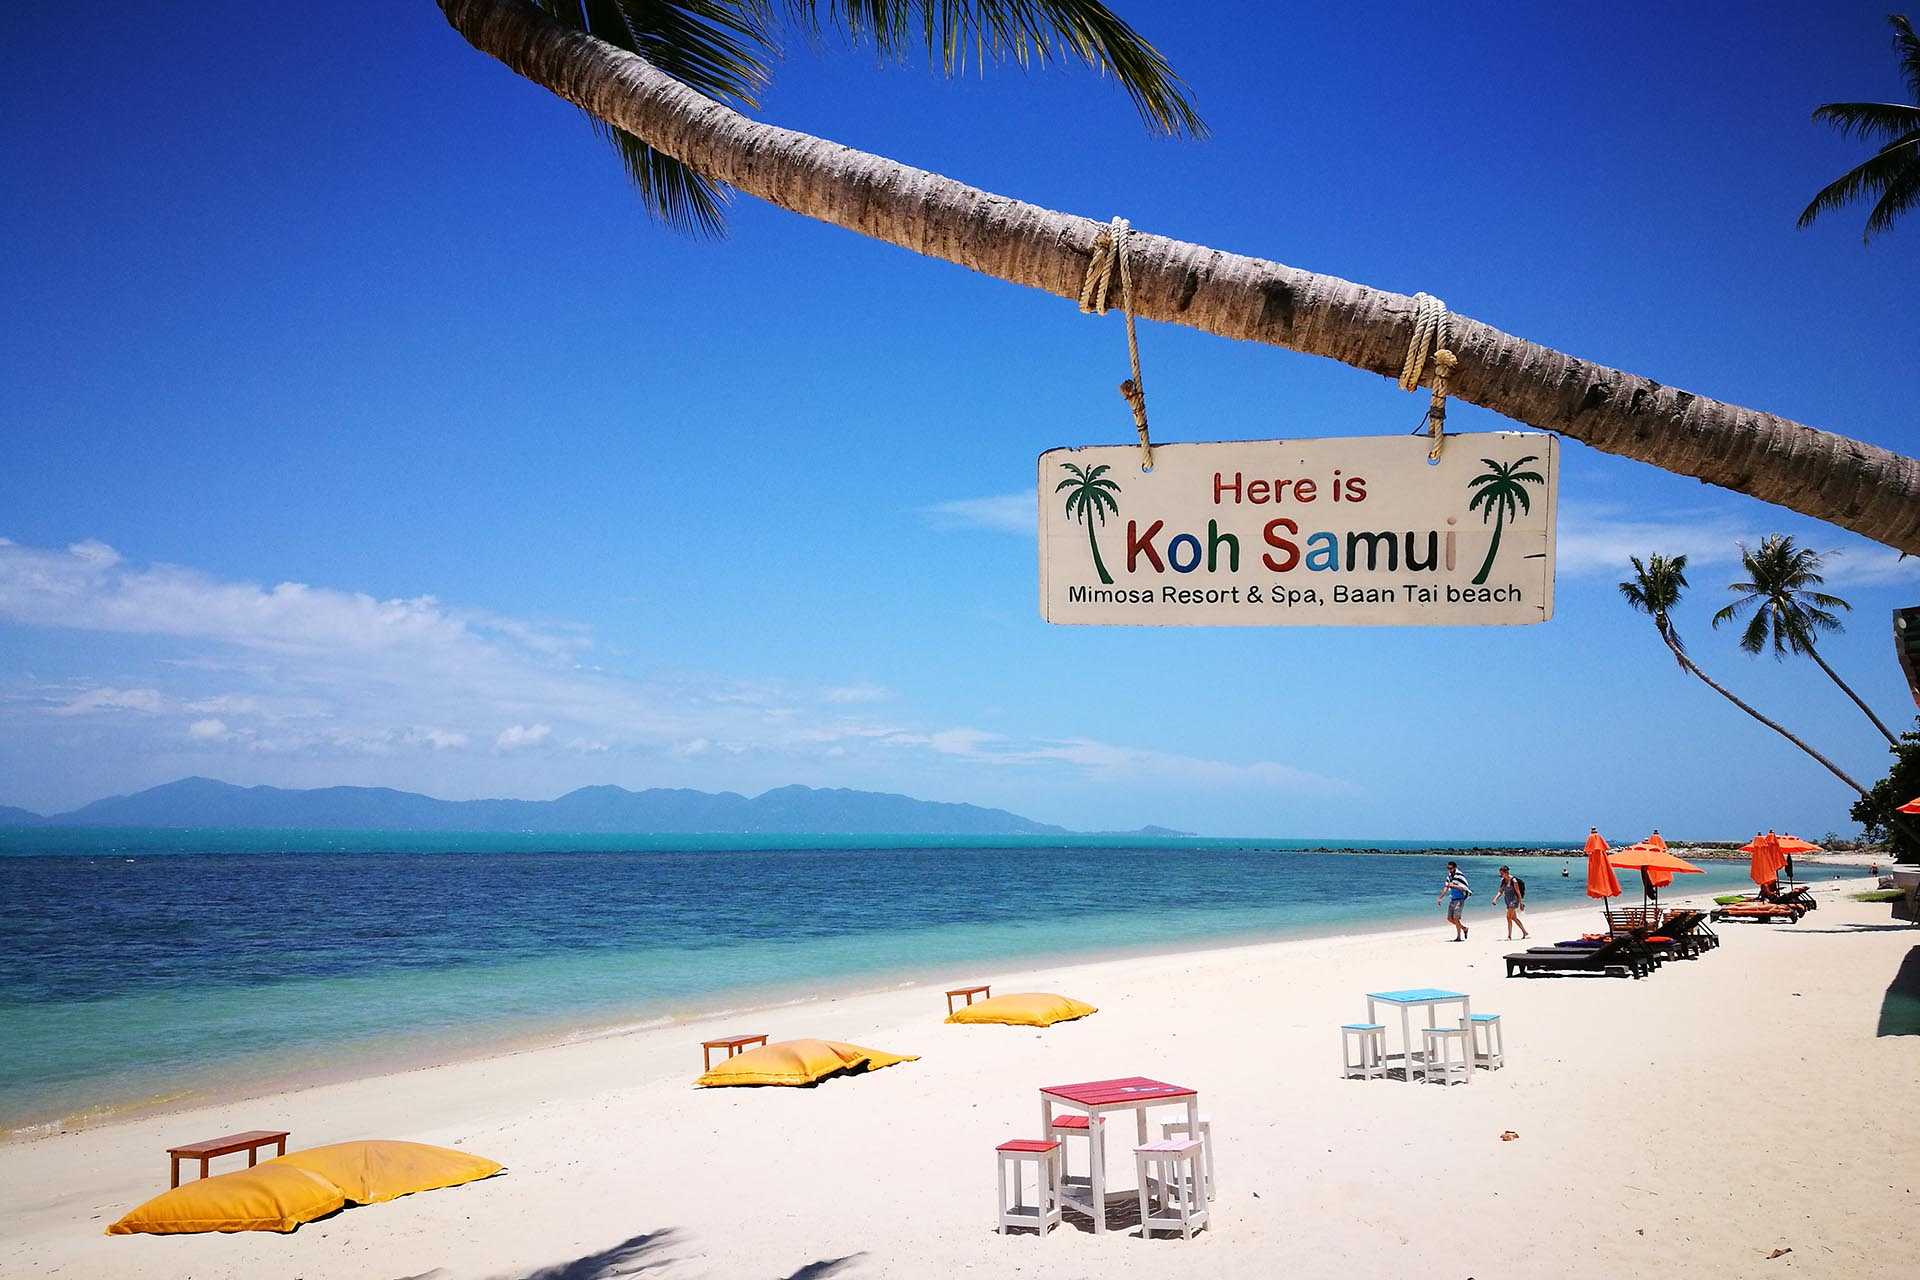 Maenam beach, koh samui: is it the right beach for you?